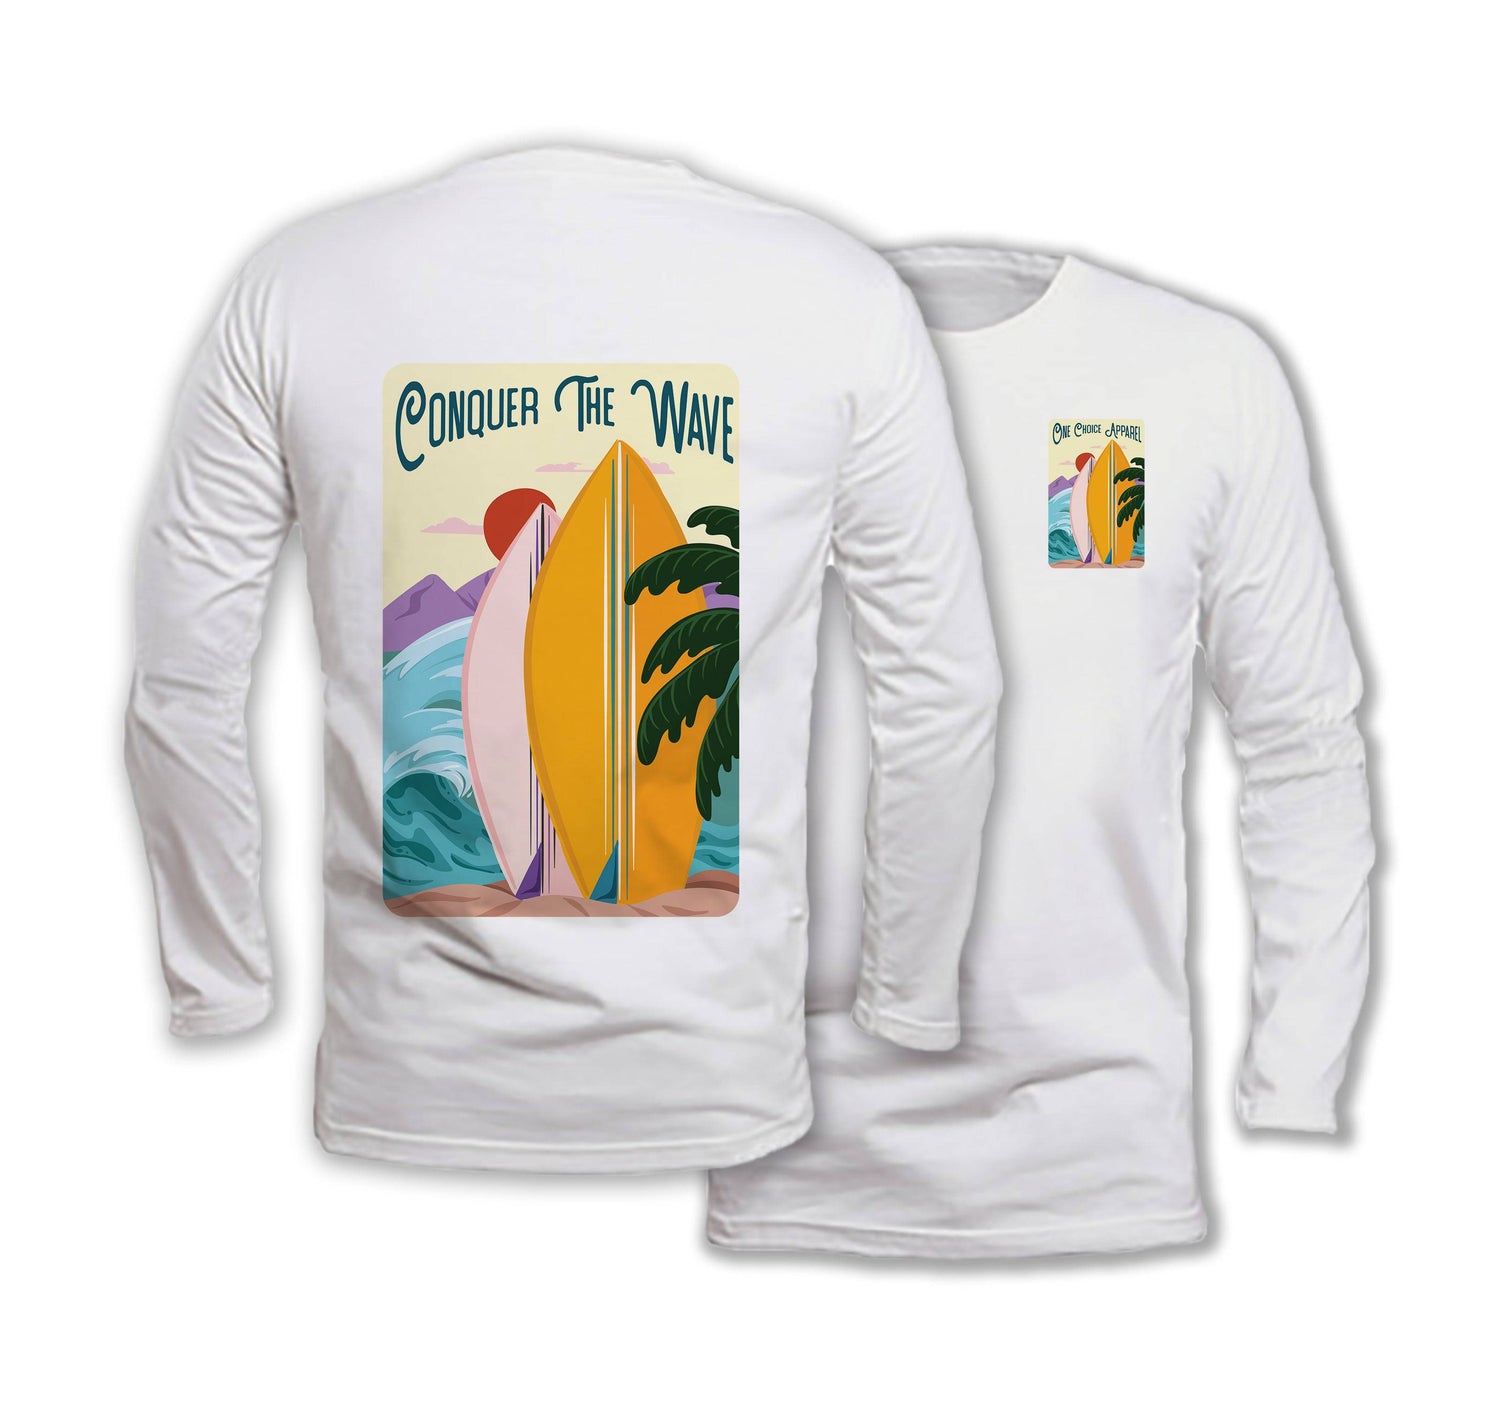 Conquer The Wave - Long Sleeve Organic Cotton T-Shirt - One Choice Apparel